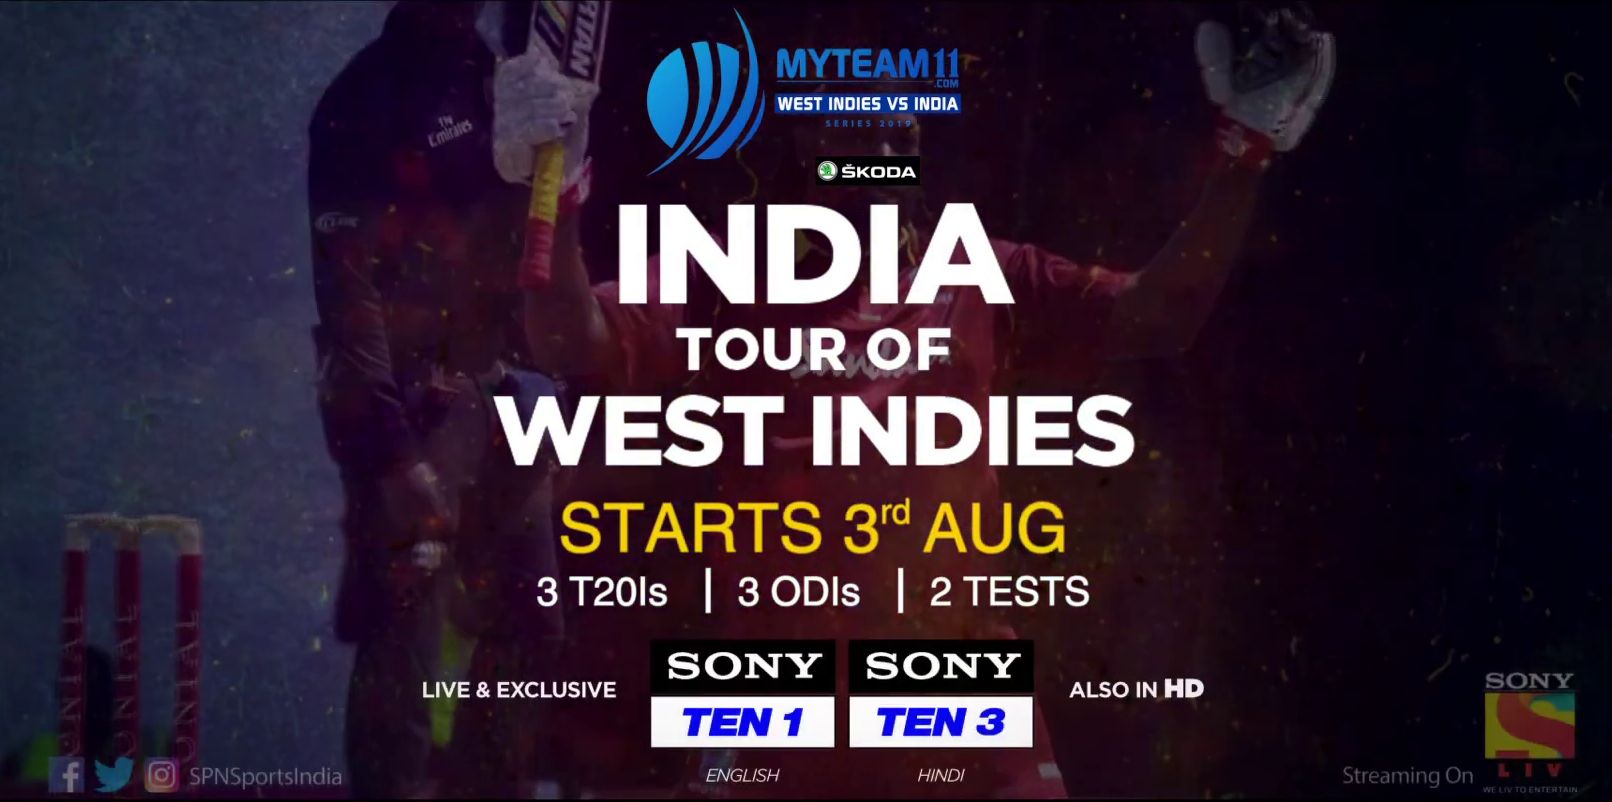 Hotstar Cricket Live Streaming - India Vs New Zealand 2017 One Day Matches1612 x 802